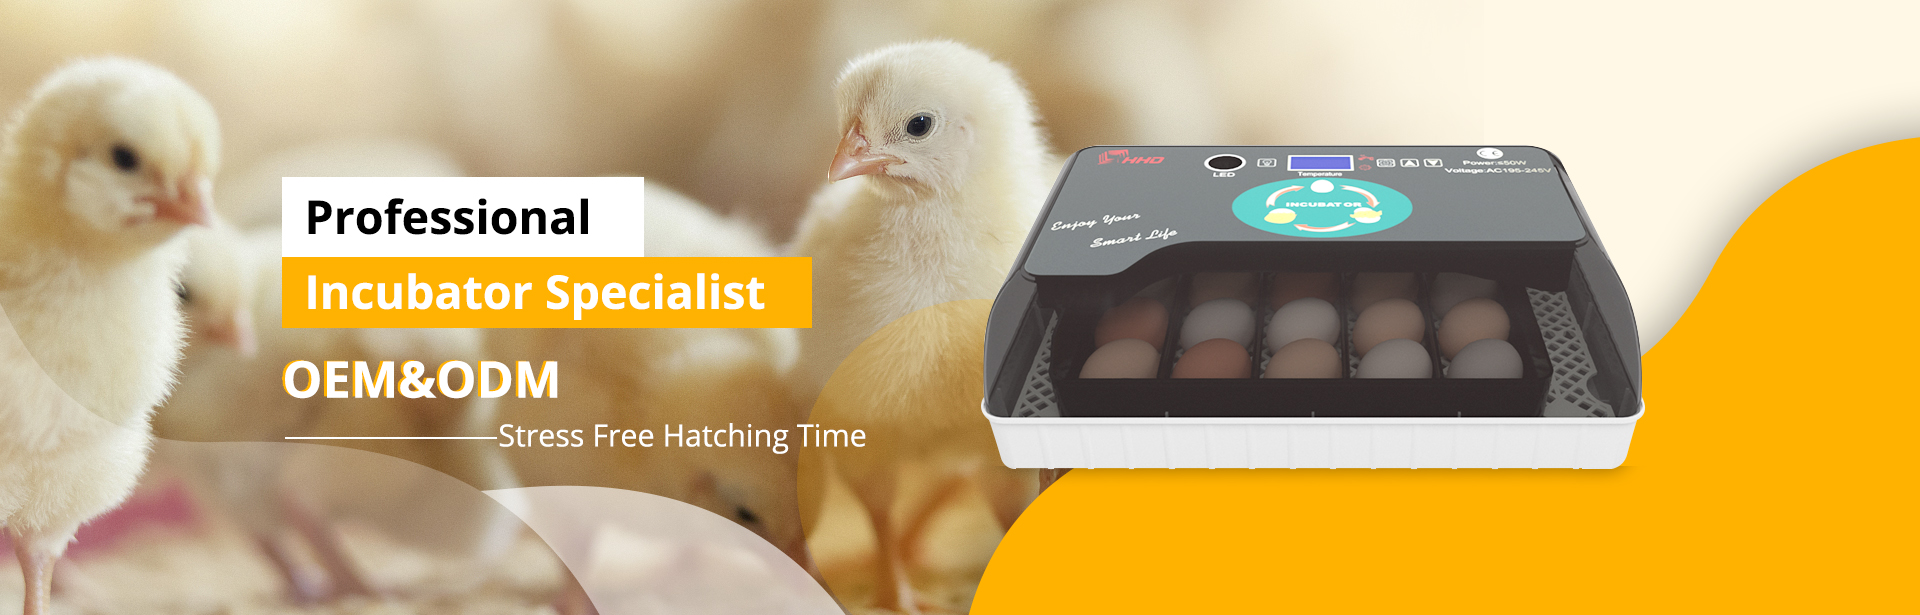 /incubator-hhd-1220-automatic-egg-turning-mini-chicken-eggs-brooder-product/